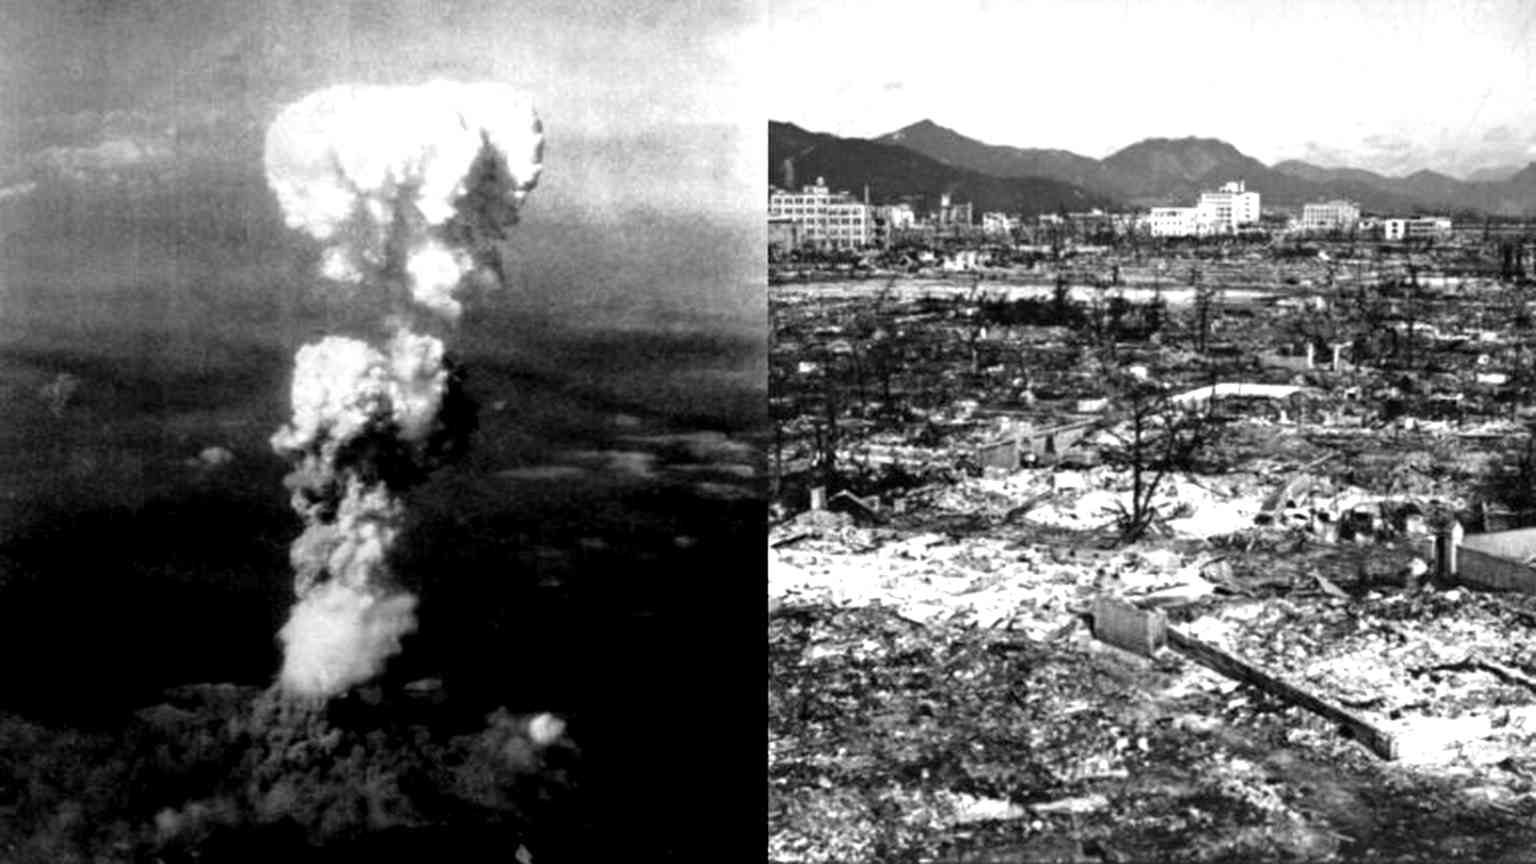 Watch that survived atomic bombing in Hiroshima sells for $31,000